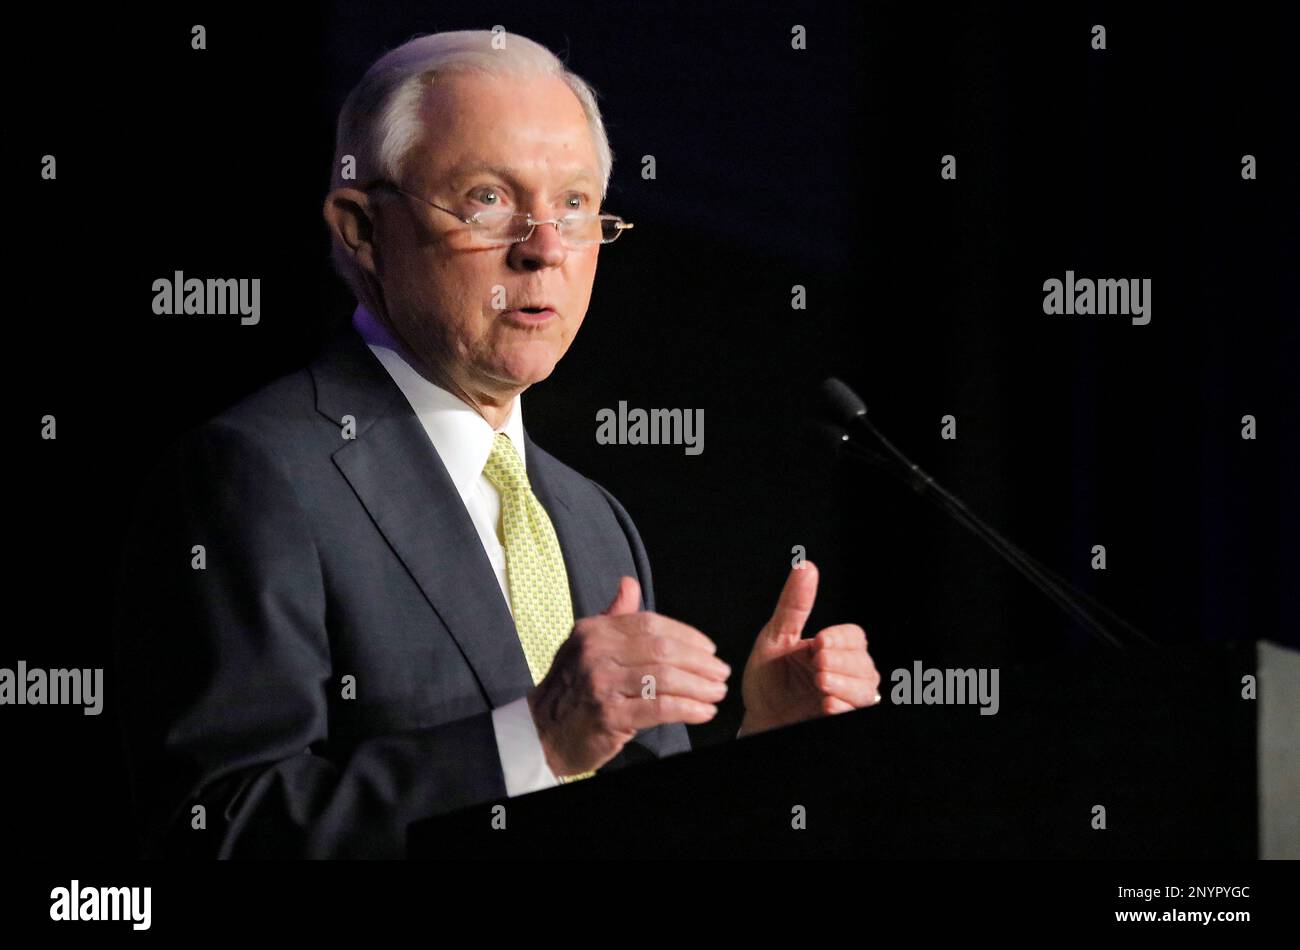 U.S. Attorney General Jeff Sessions speaks at the opening session of the National Law Enforcement Conference on Human Exploitation at the Sheraton Atlanta Hotel, Tuesday morning, June 6, 2017, in Atlanta. (Bob Andres/Atlanta Journal-Constitution via AP) Stock Photo